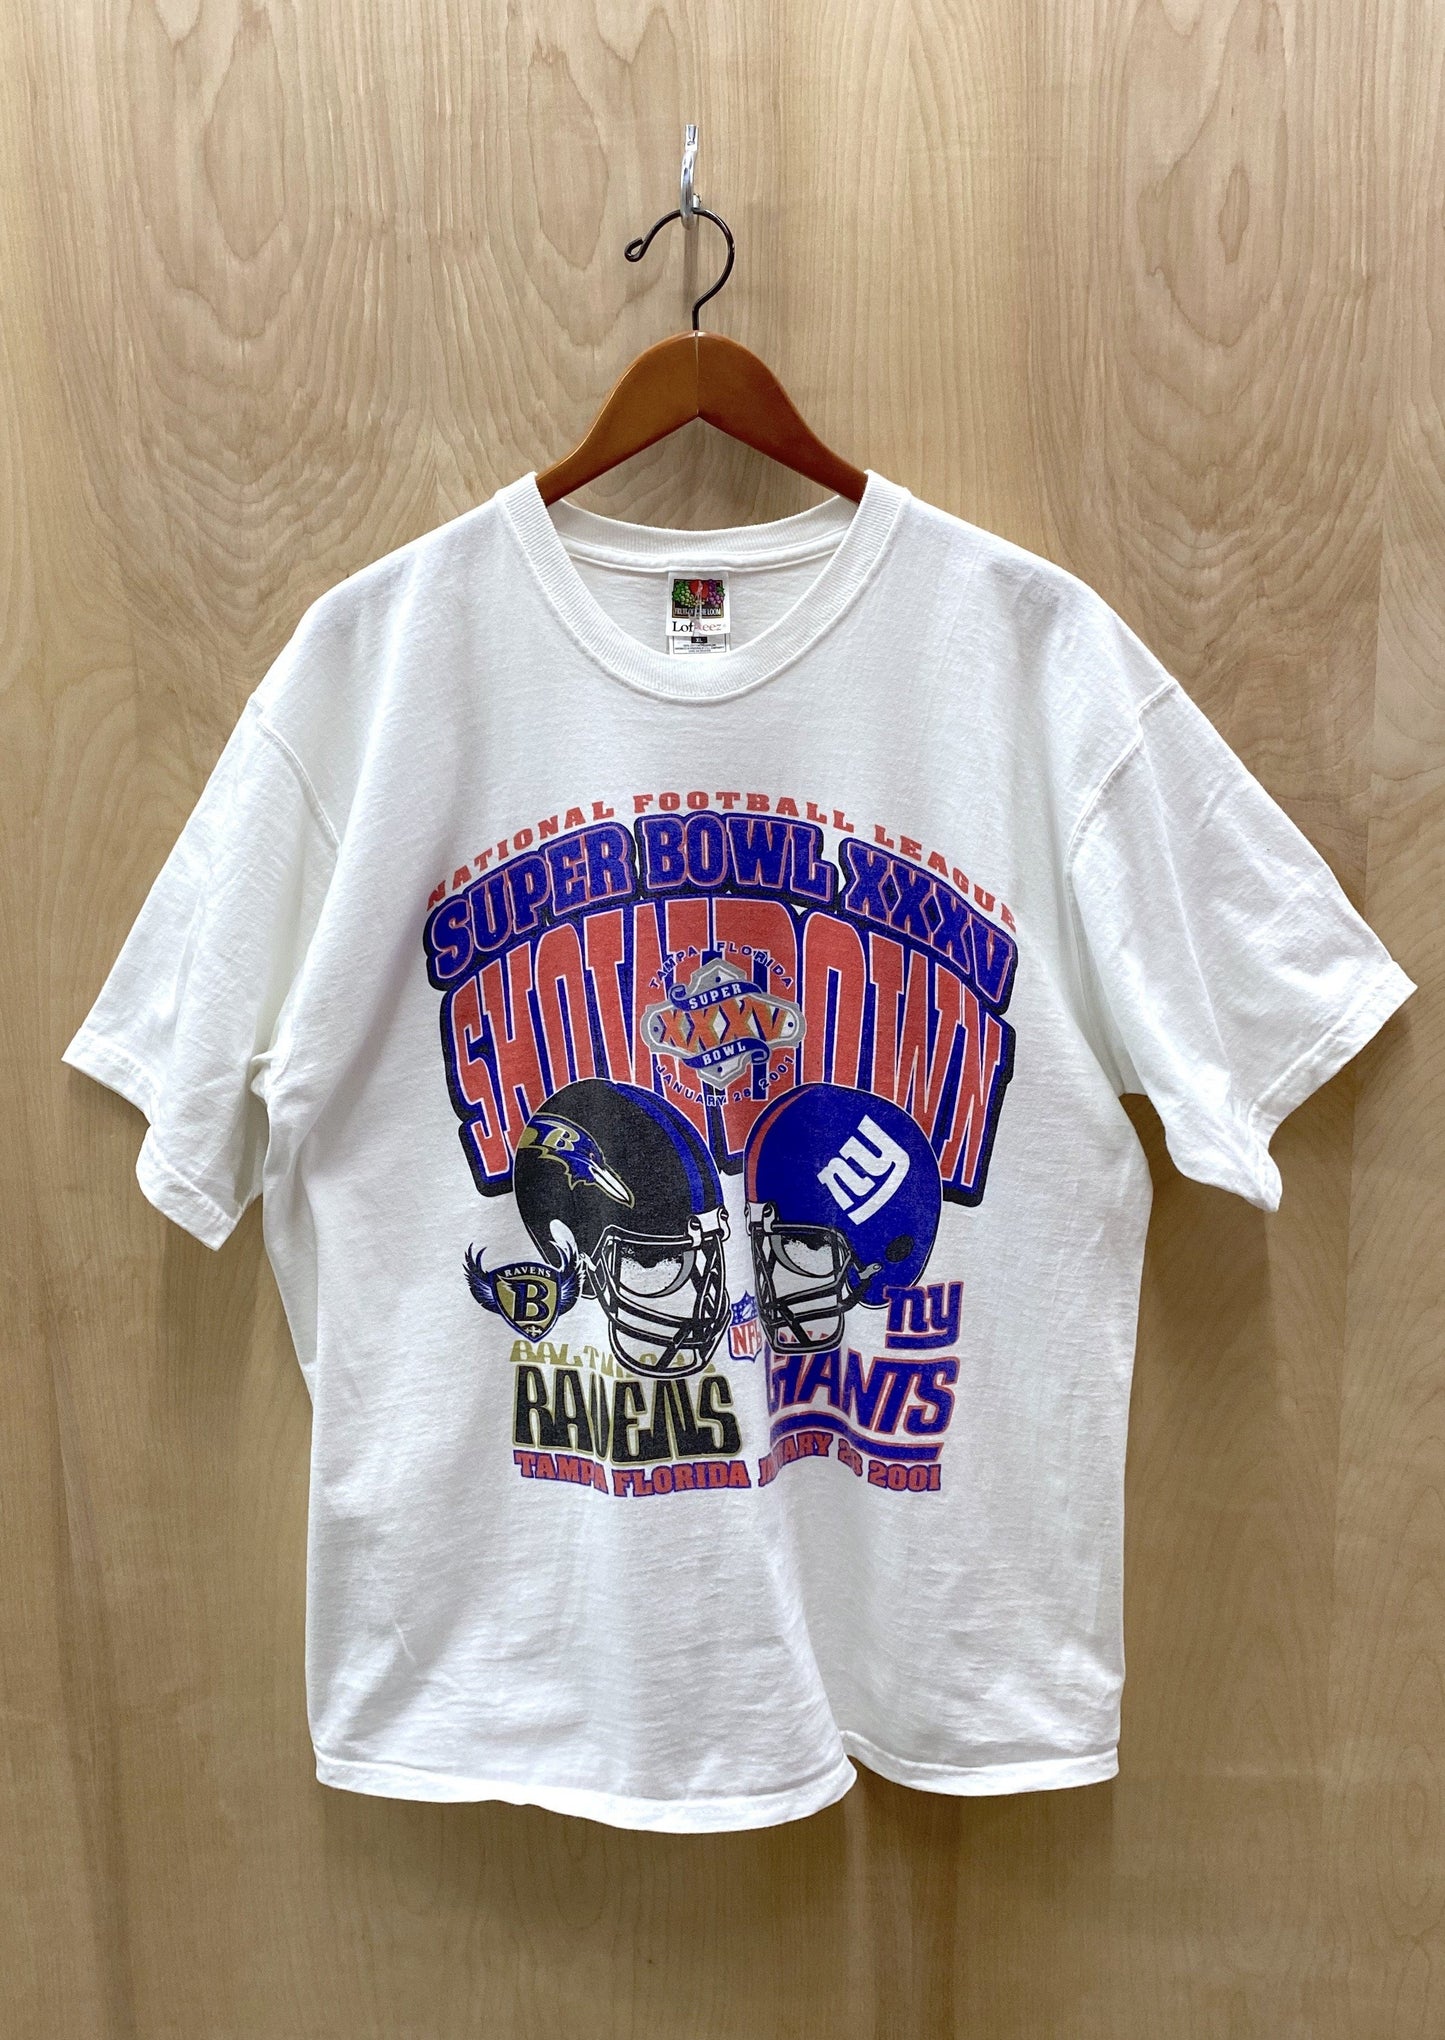 Load image into Gallery viewer, 2001 Superbowl Showdown Giants/Ravens T-Shirt (4811525816400)
